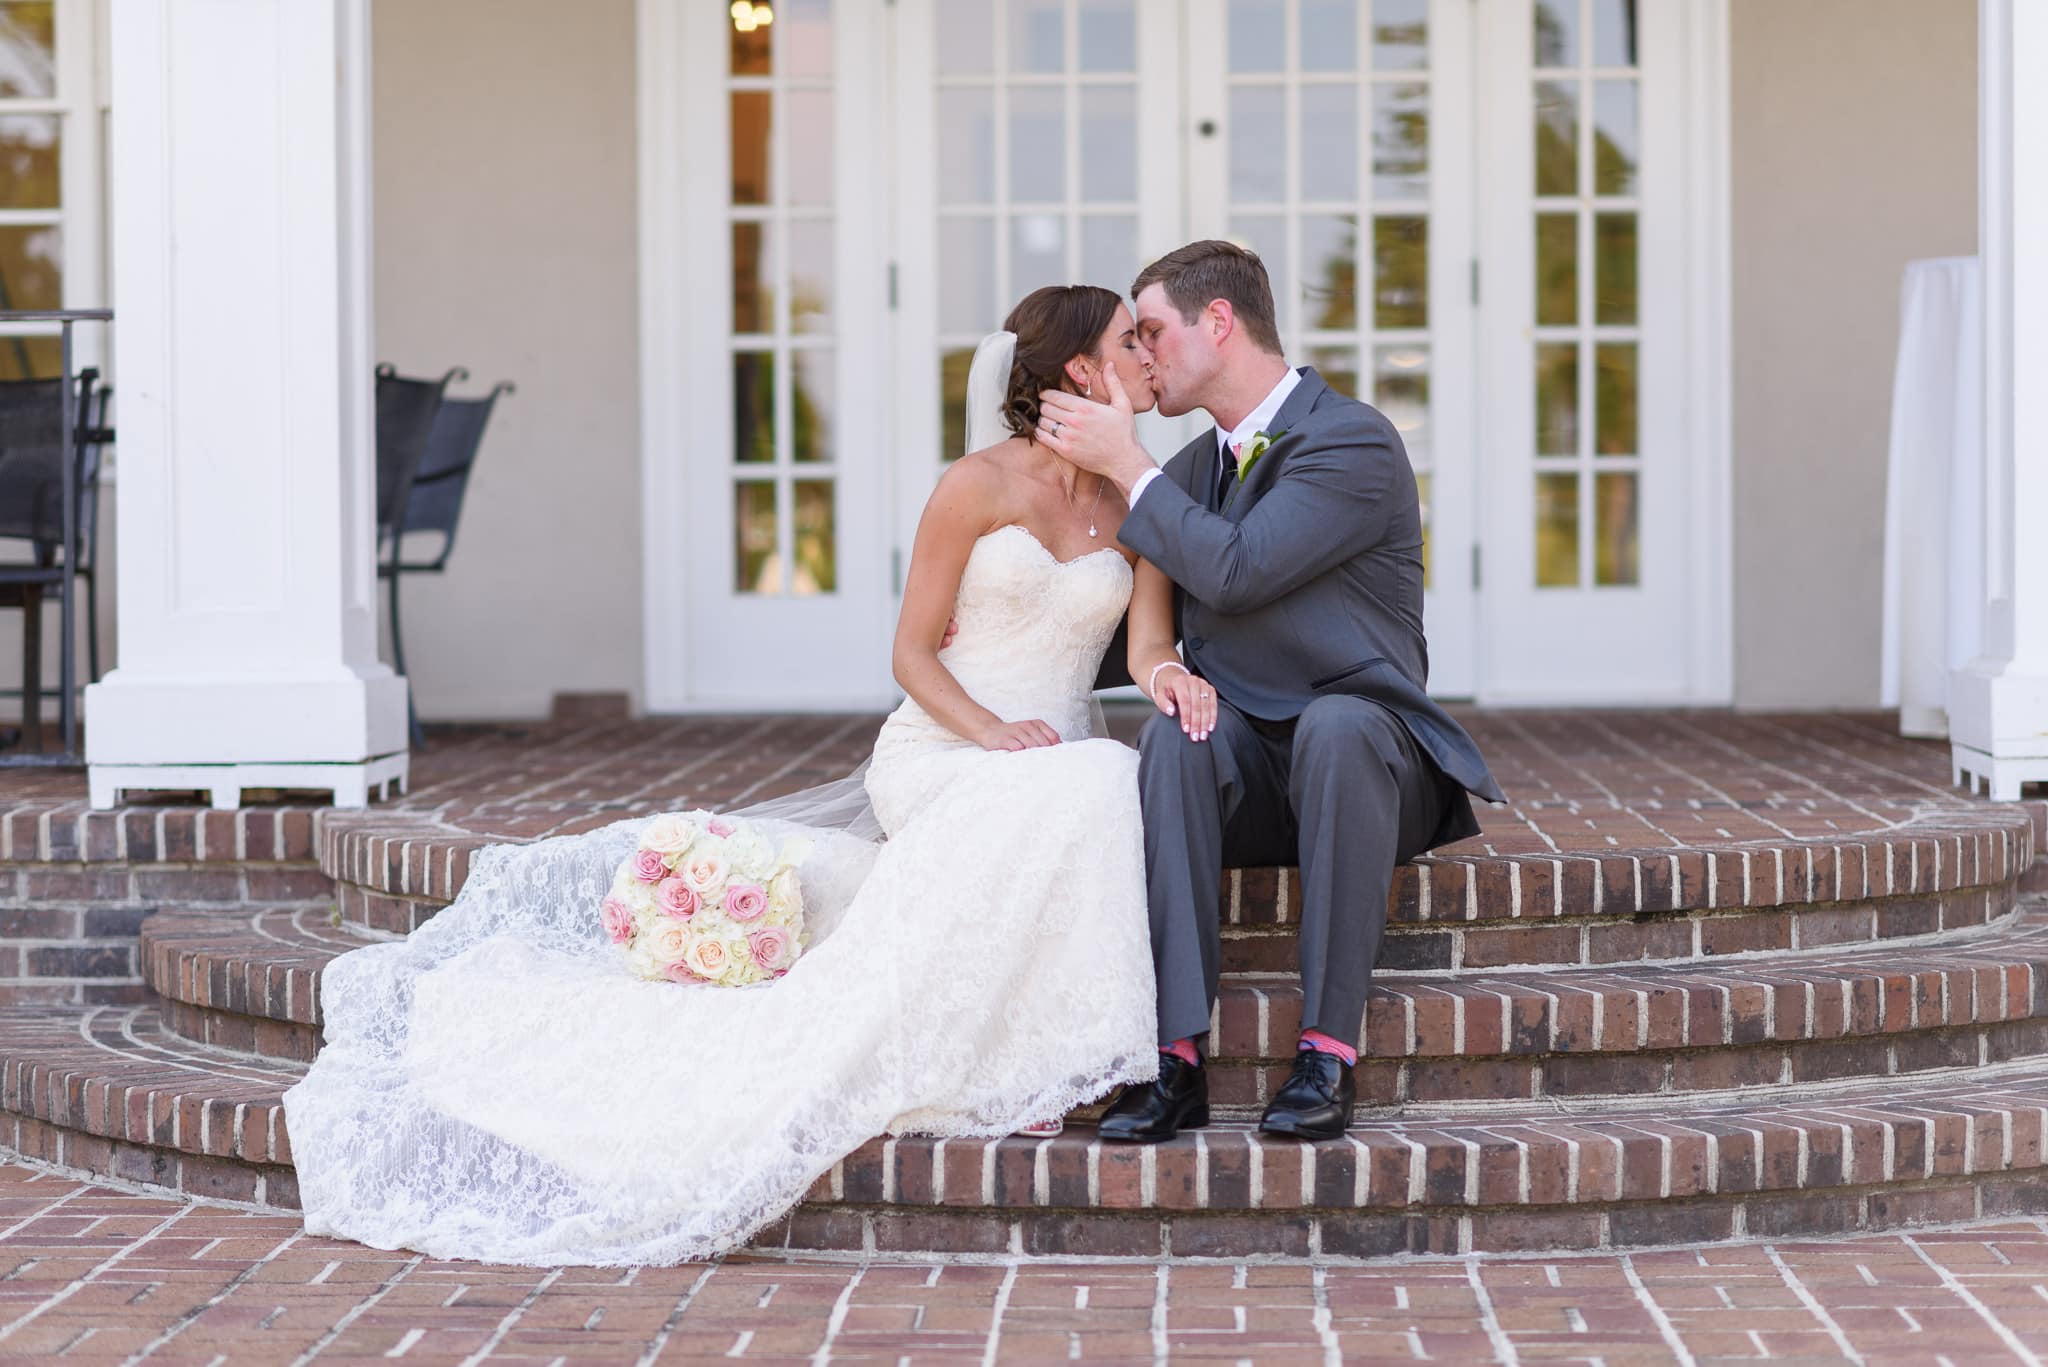 Kiss on the steps of the clubhouse - Pawleys Plantation